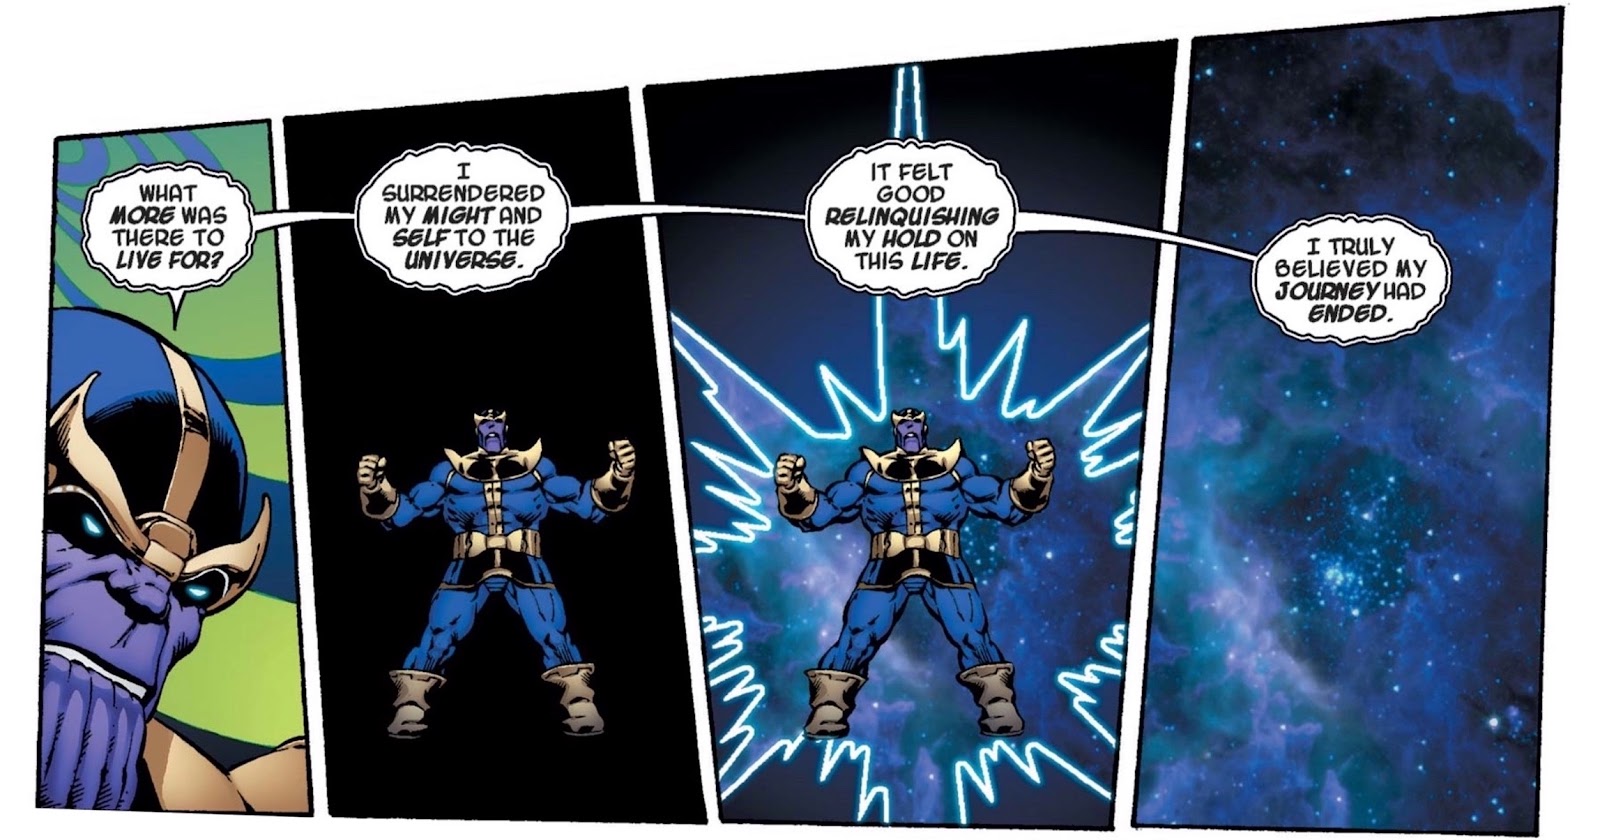 4 panels showing Thanos blinking out of existence as he describes having felt contentment than his ‘journey had ended’